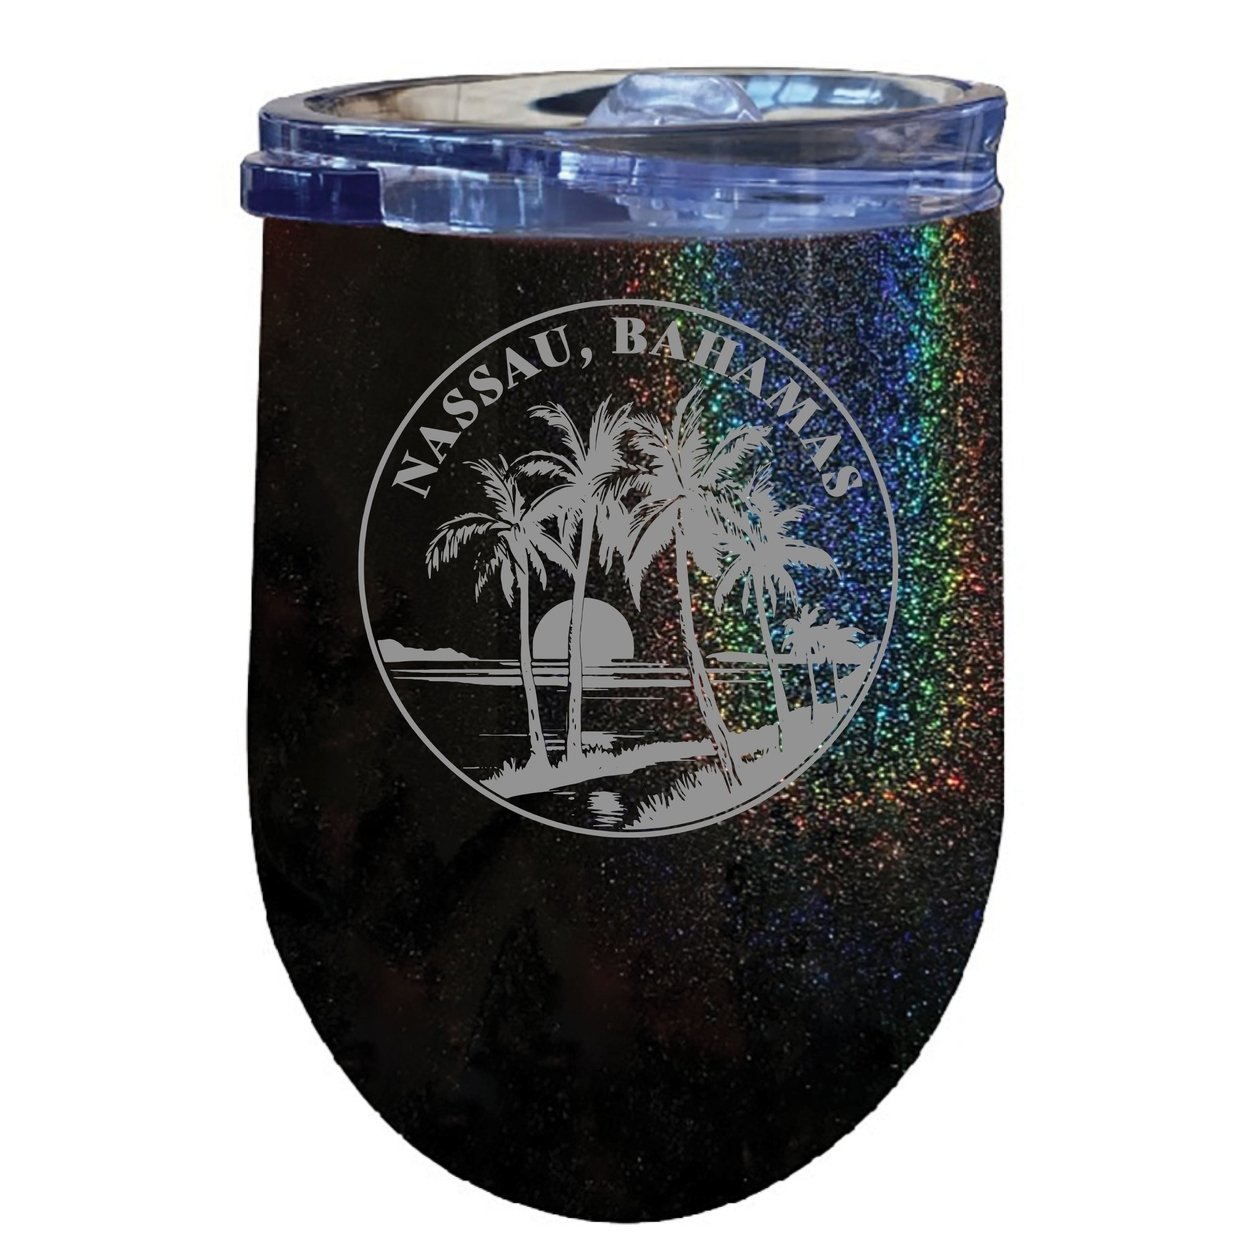 Nassau The Bahamas Souvenir 12 Oz Engraved Insulated Wine Stainless Steel Tumbler - White,,2-Pack